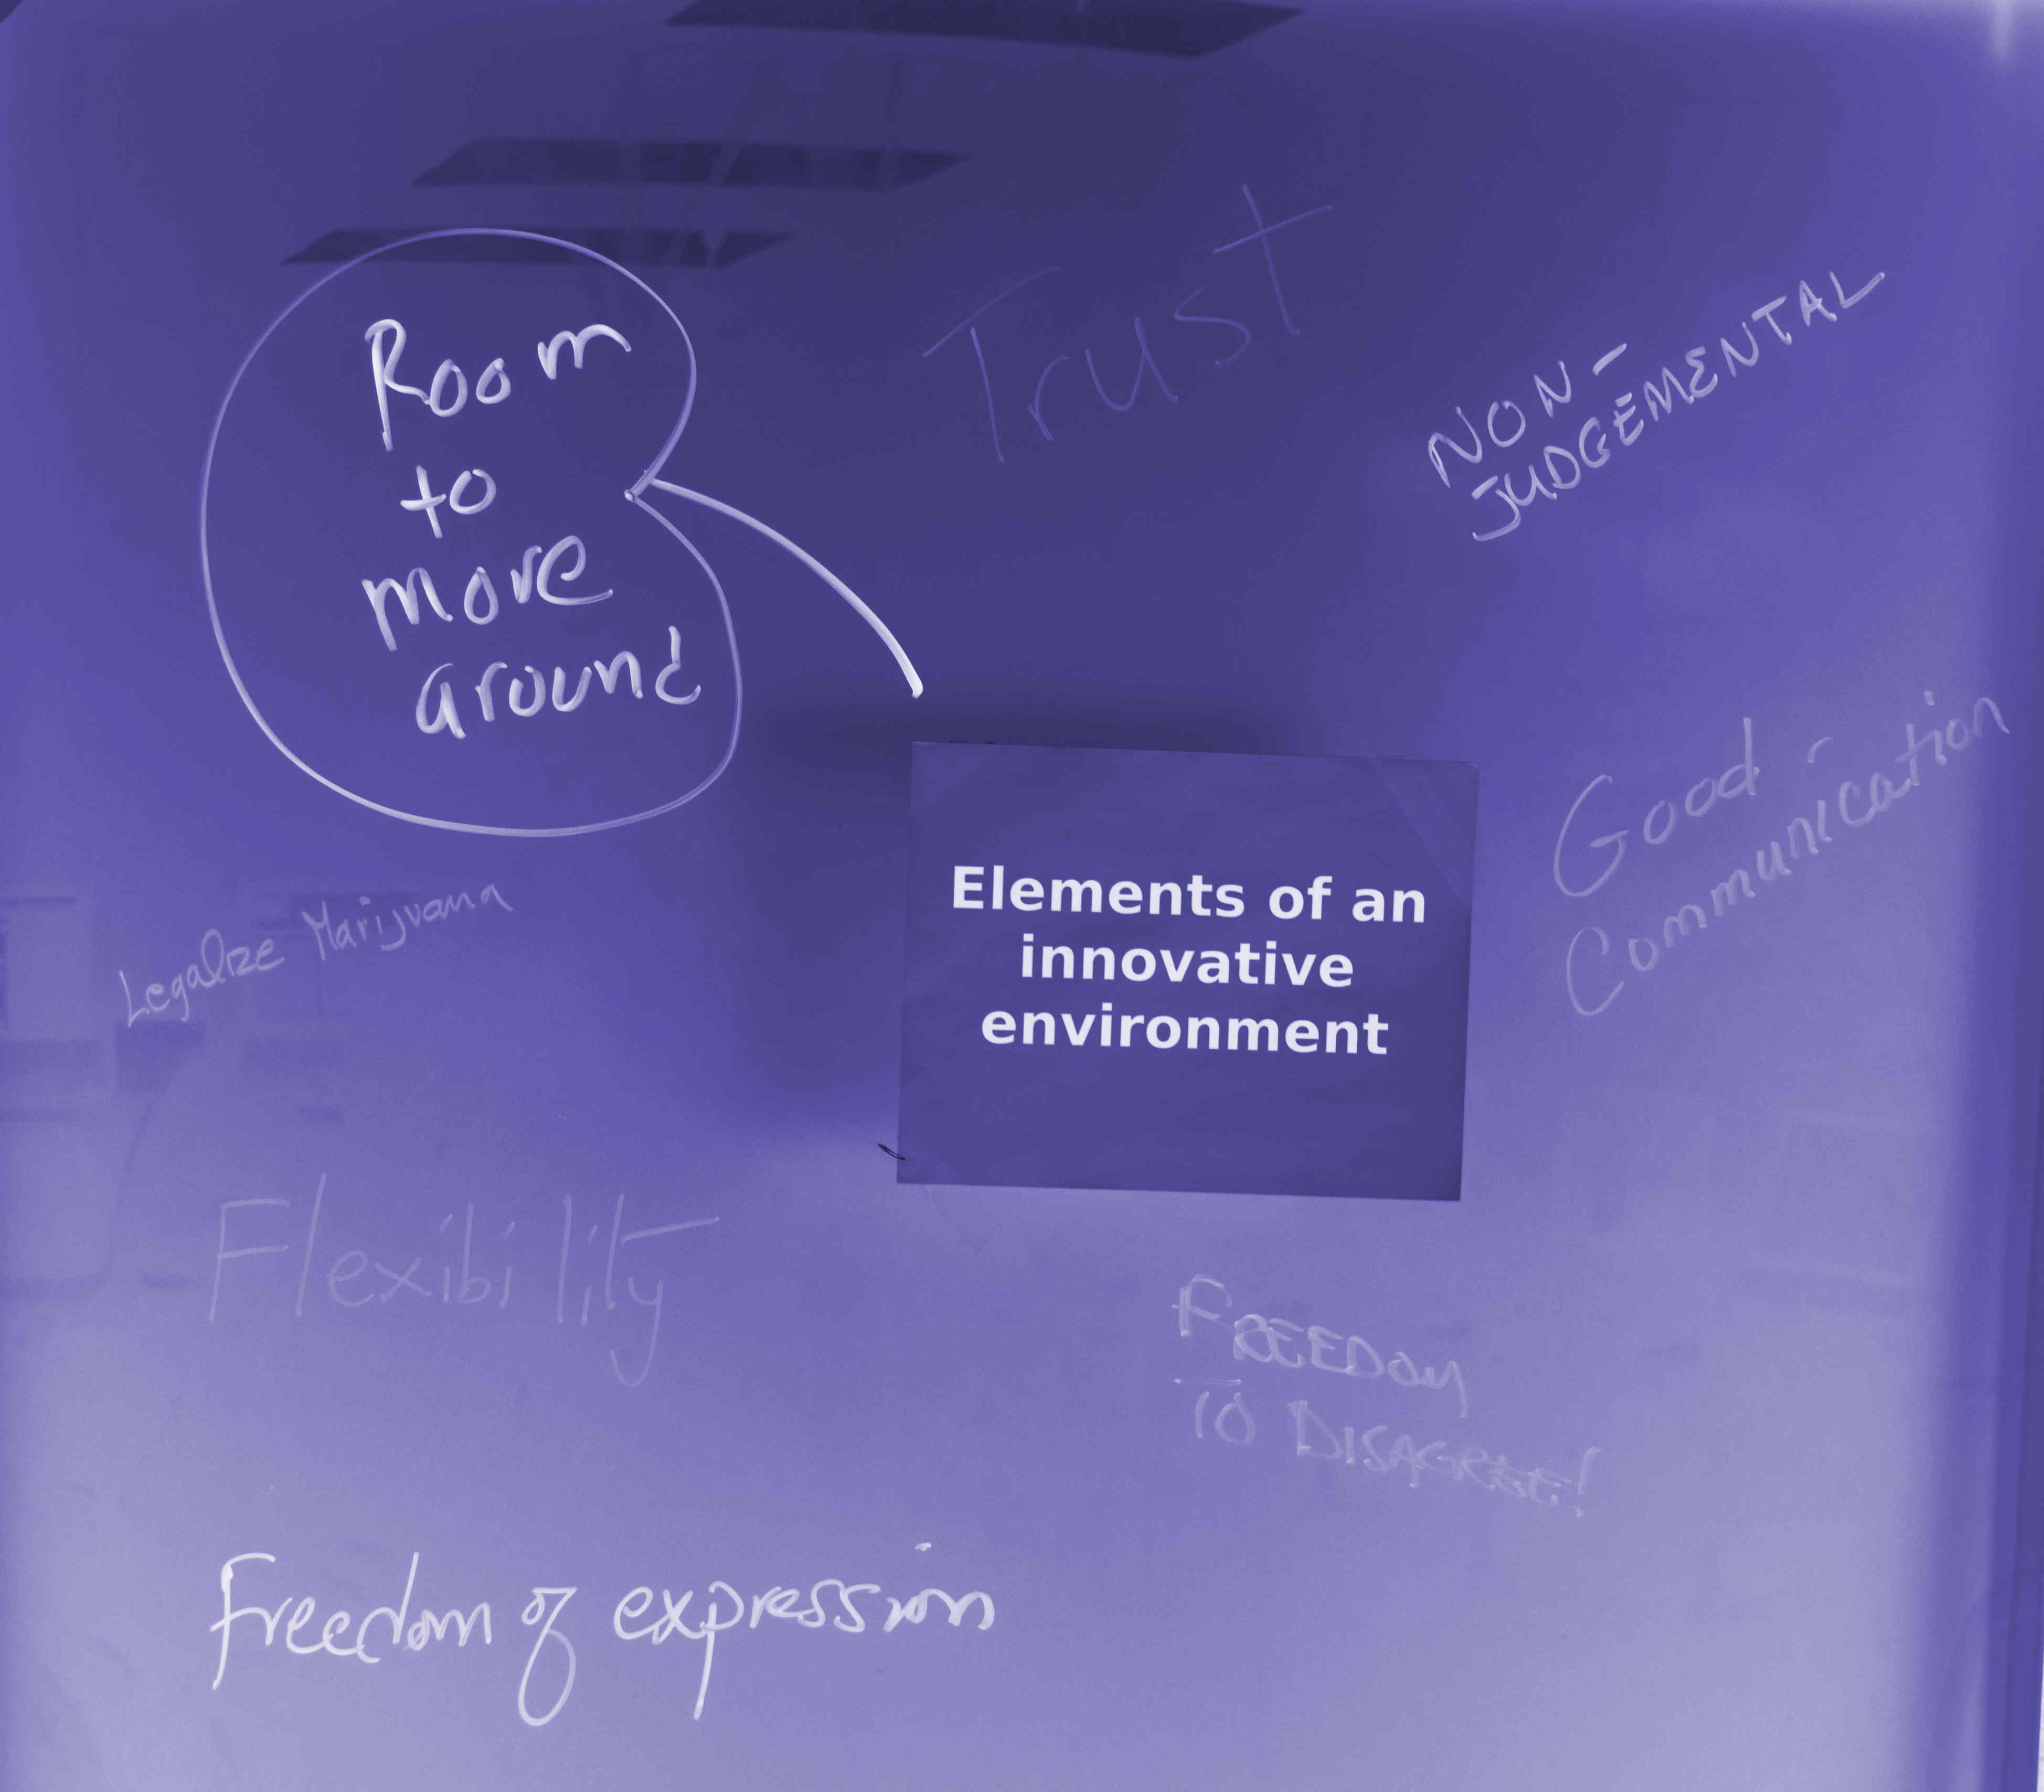 Mind-map ideas related to innovative environments contributed by guests